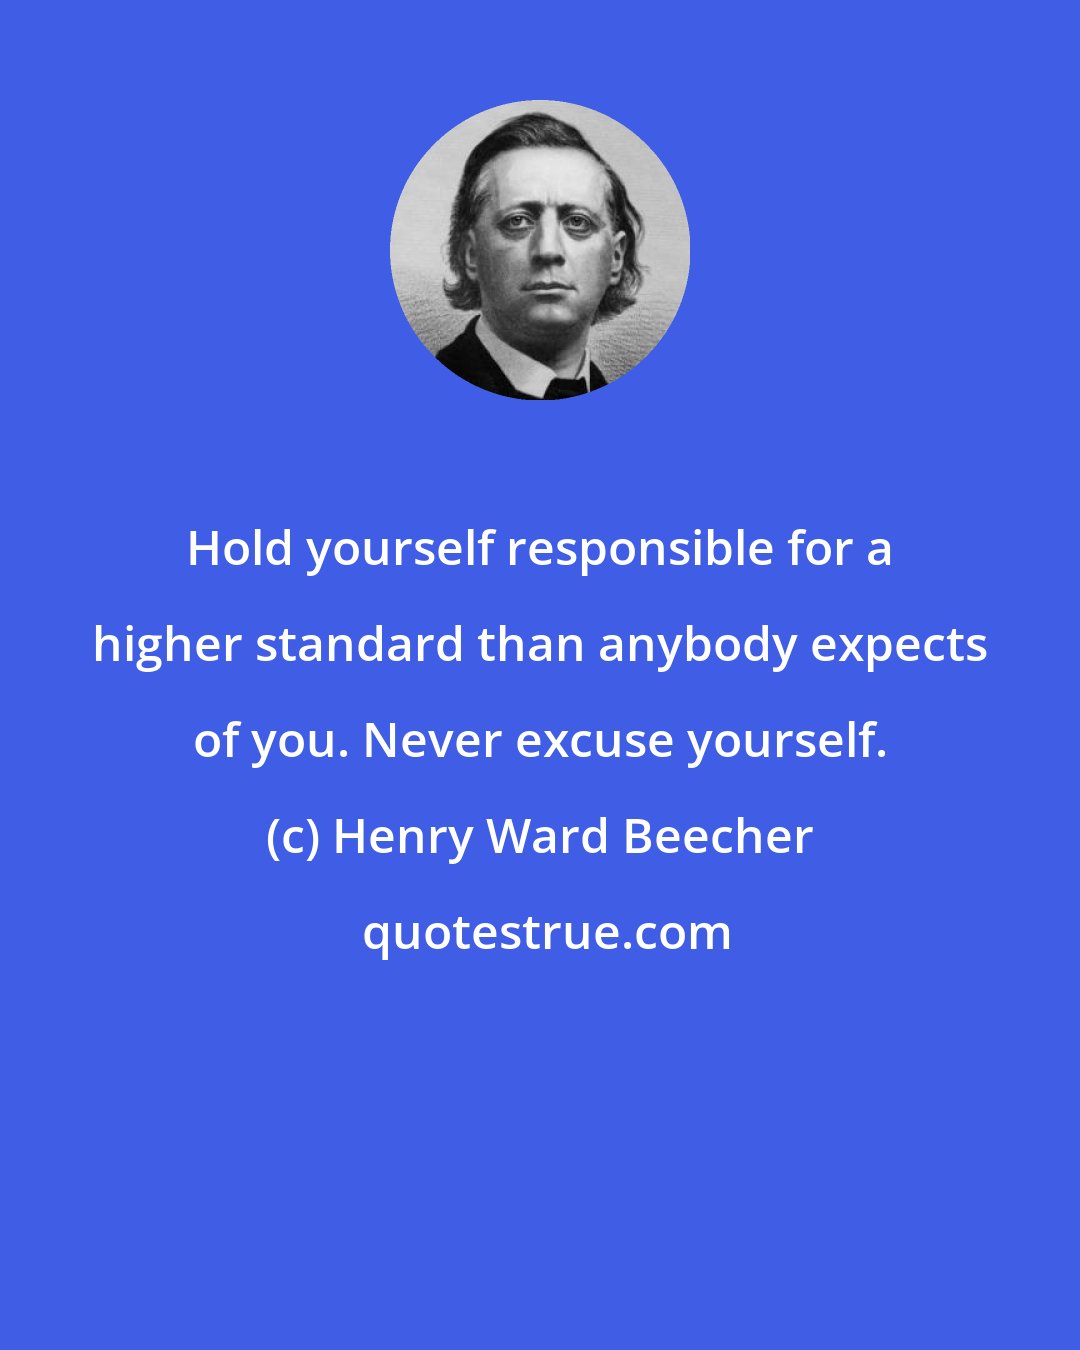 Henry Ward Beecher: Hold yourself responsible for a higher standard than anybody expects of you. Never excuse yourself.